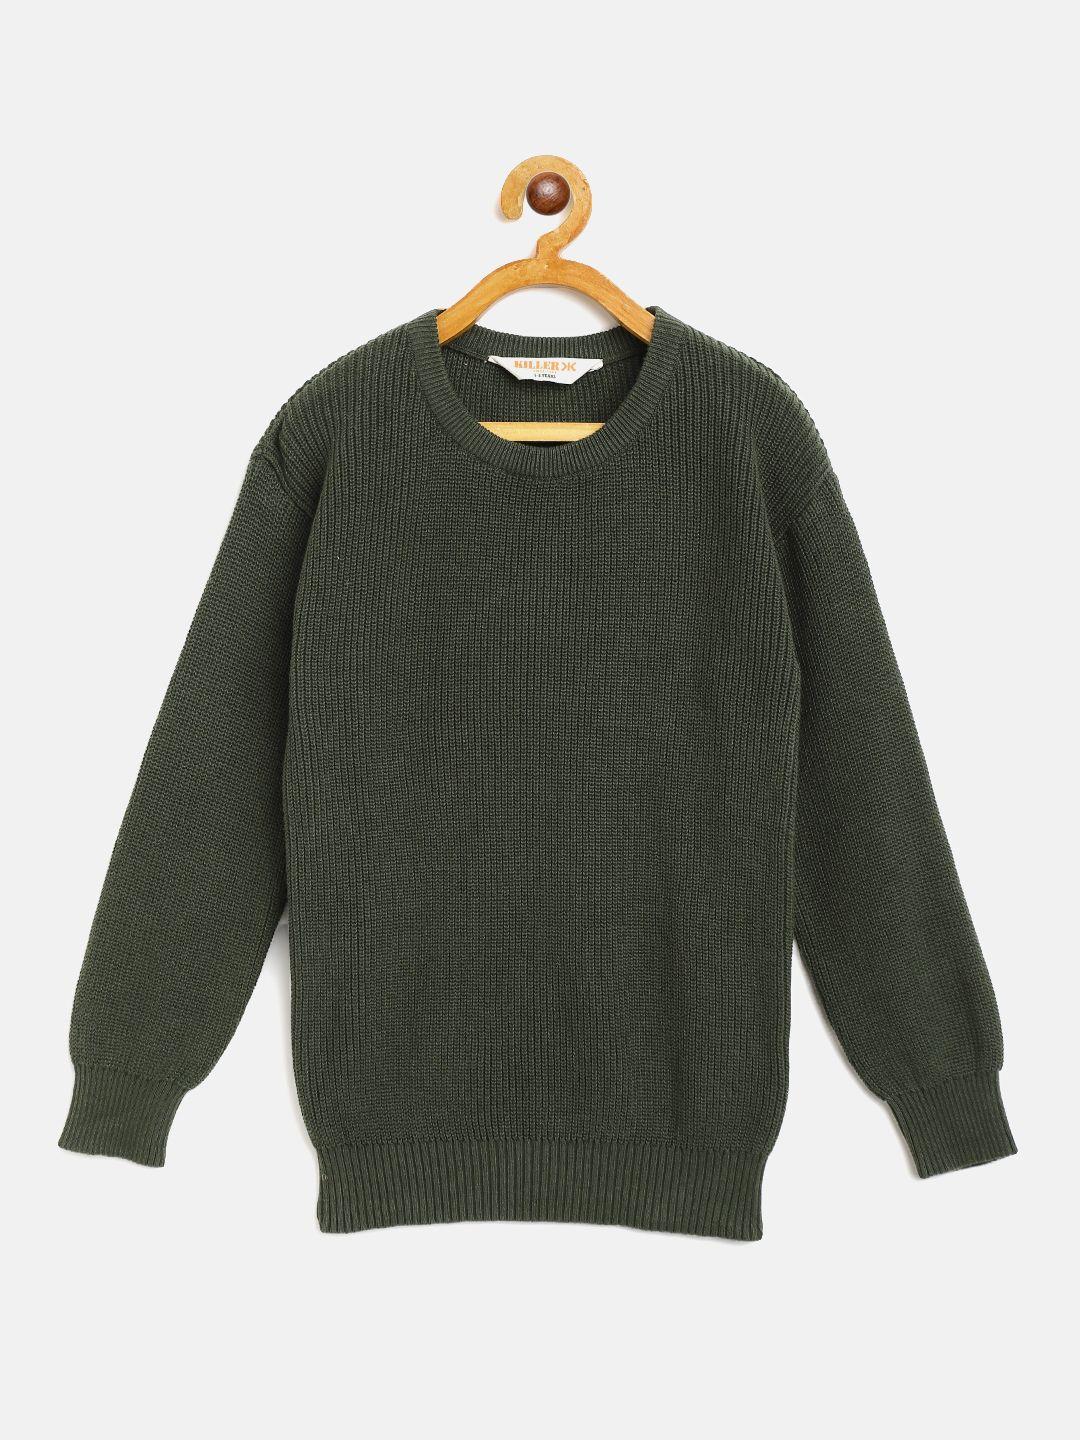 killer-boys-olive-green-pure-cotton-solid-pullover